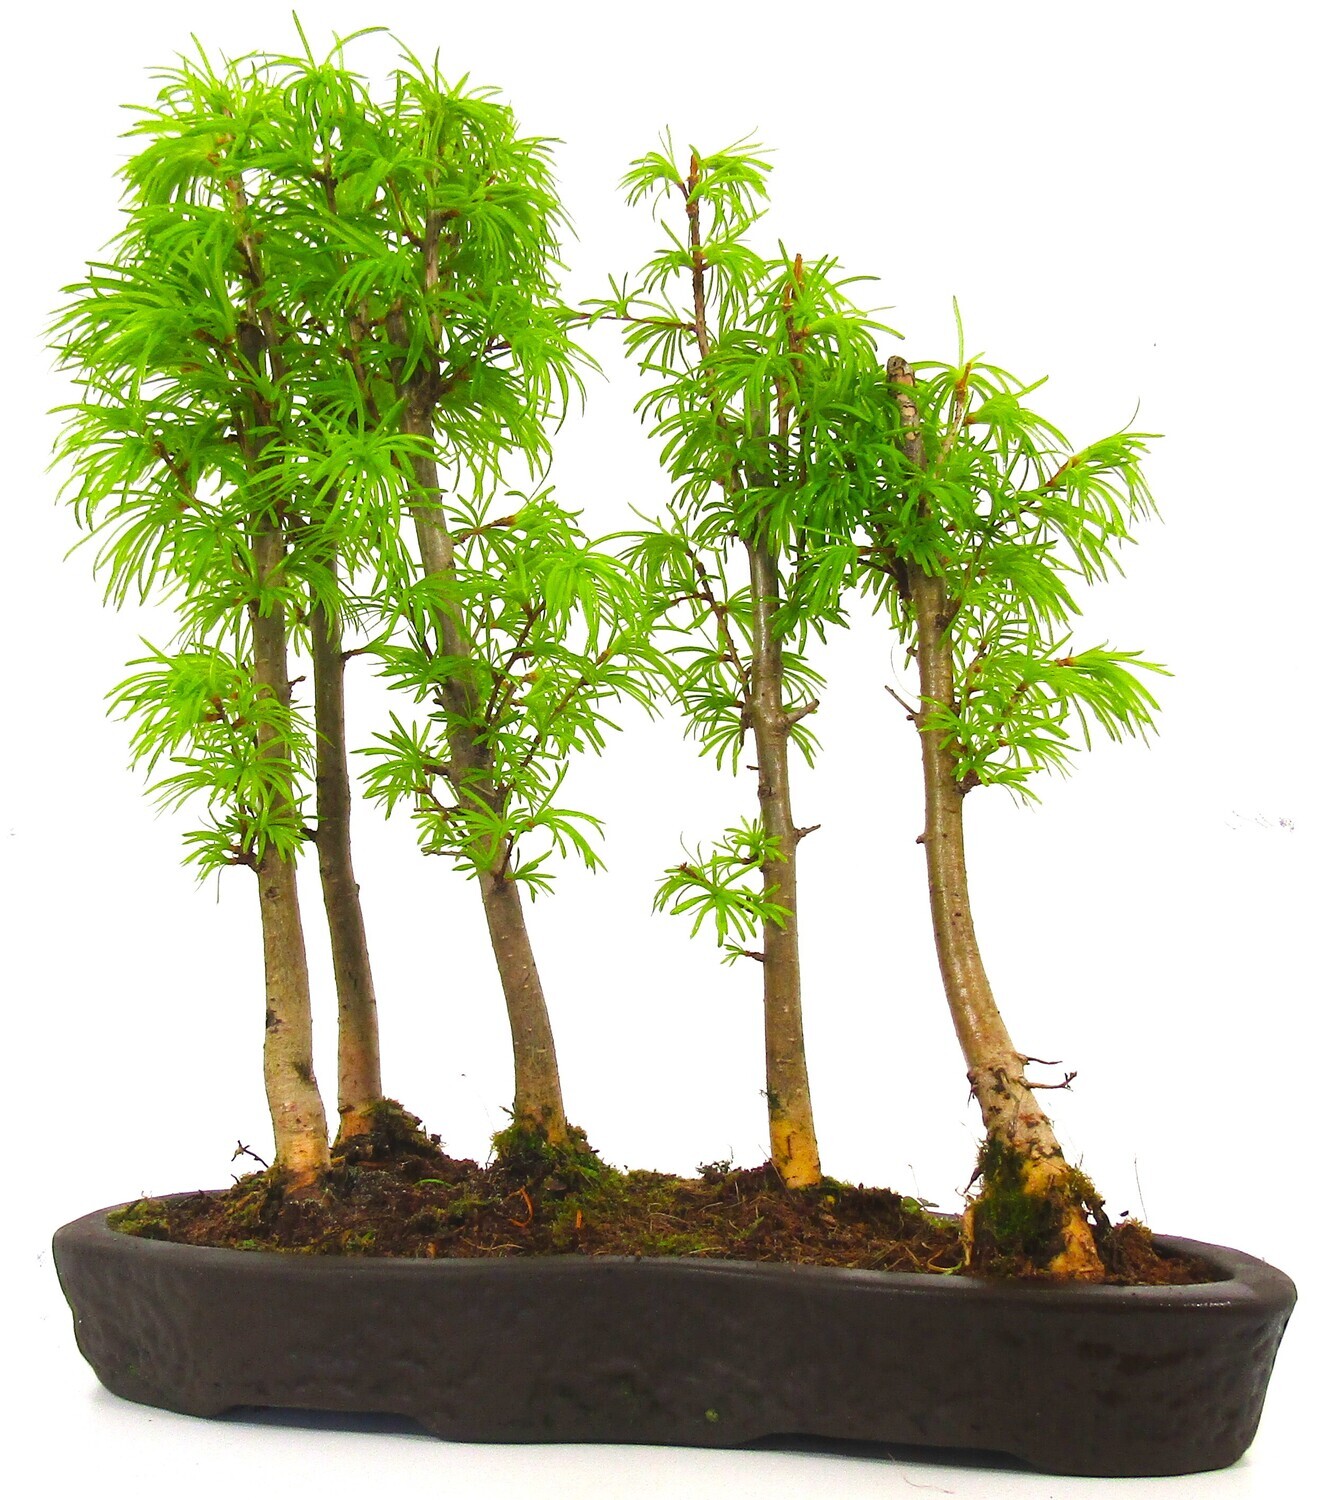 Large Psuedolarix (Golden Larch) Bonsai Tree Forest  - 5 trees supplied in a ceramic pot